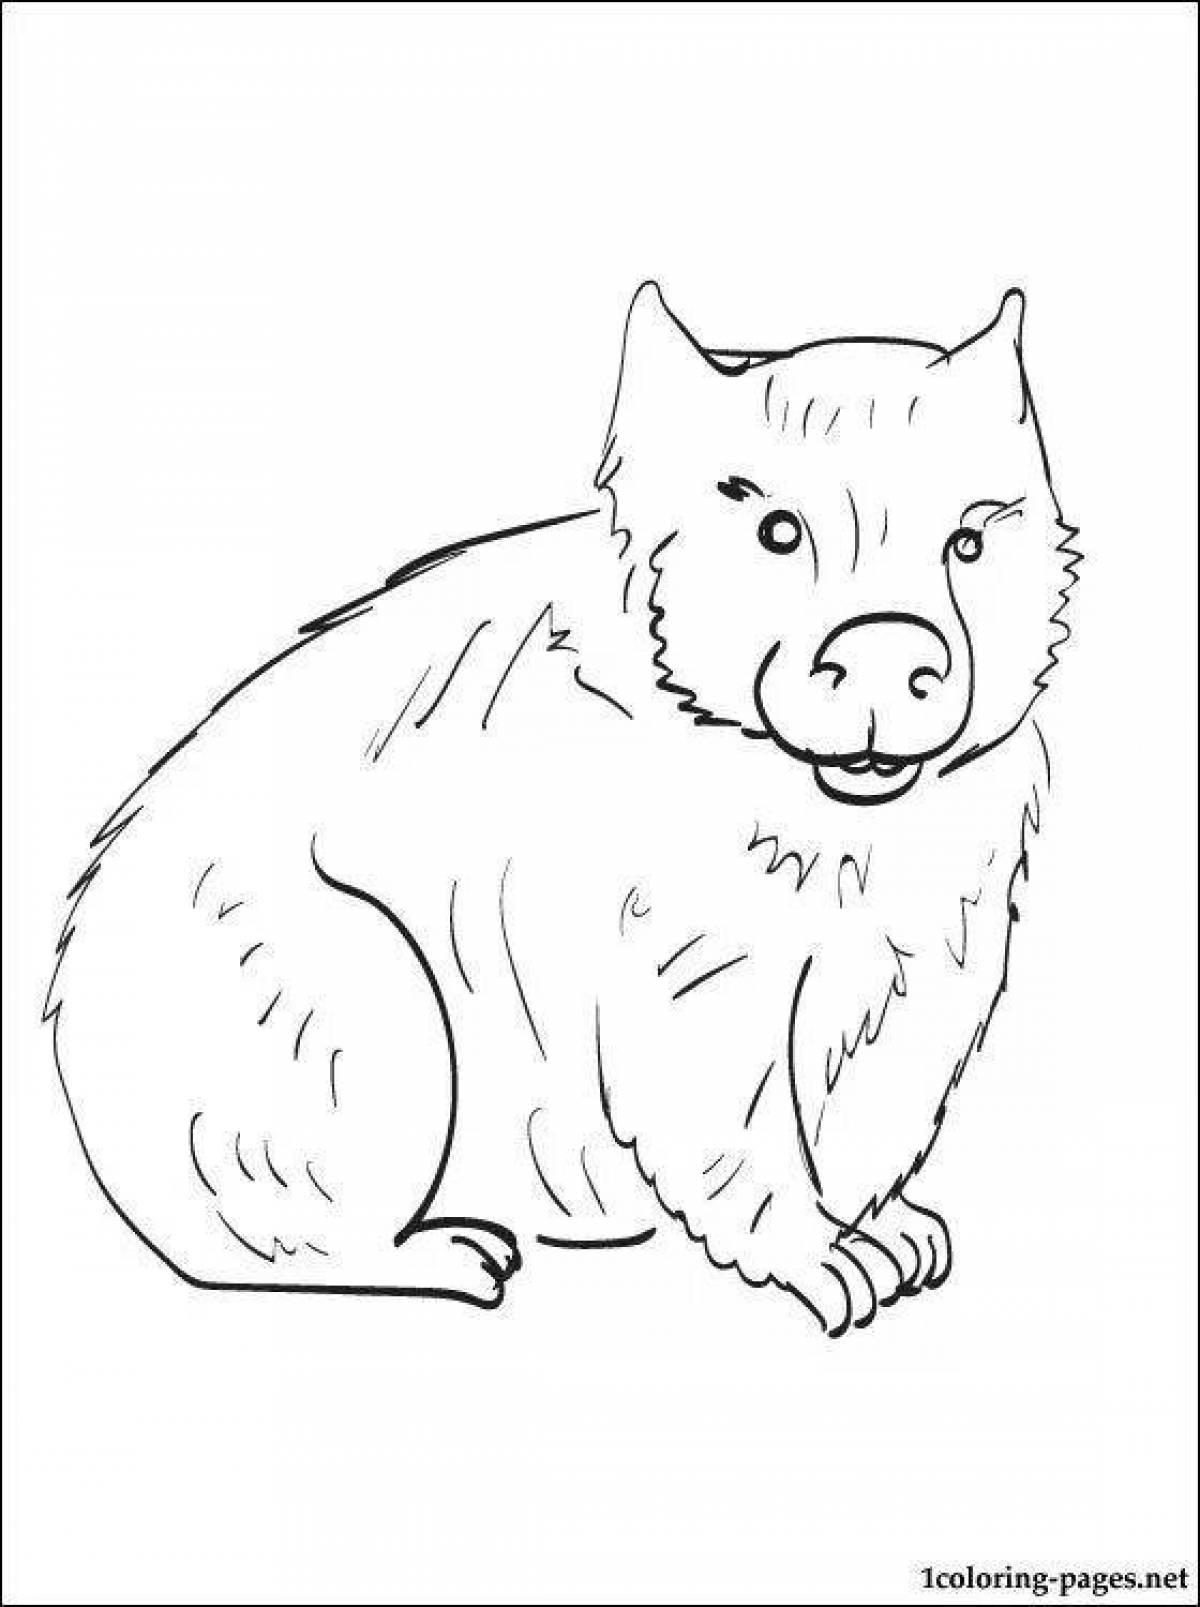 Wombat live coloring page